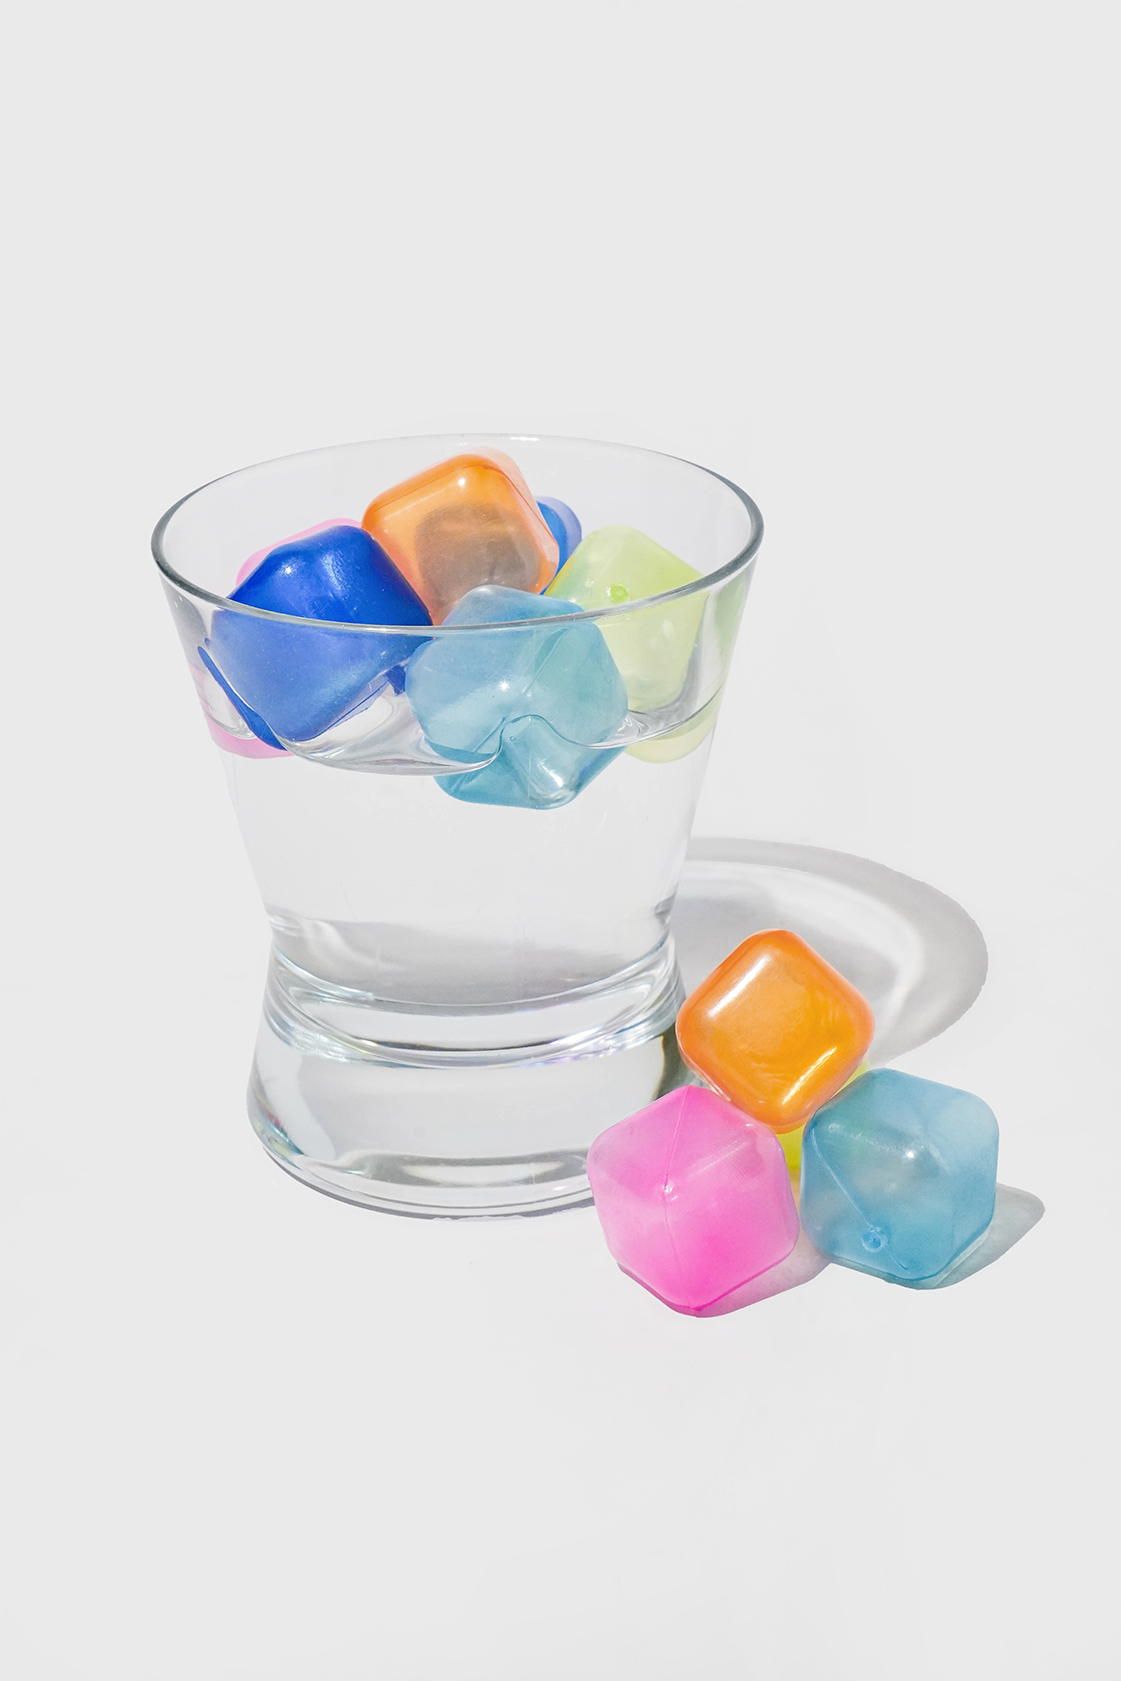 What are Reusable Ice Cubes and how to use them